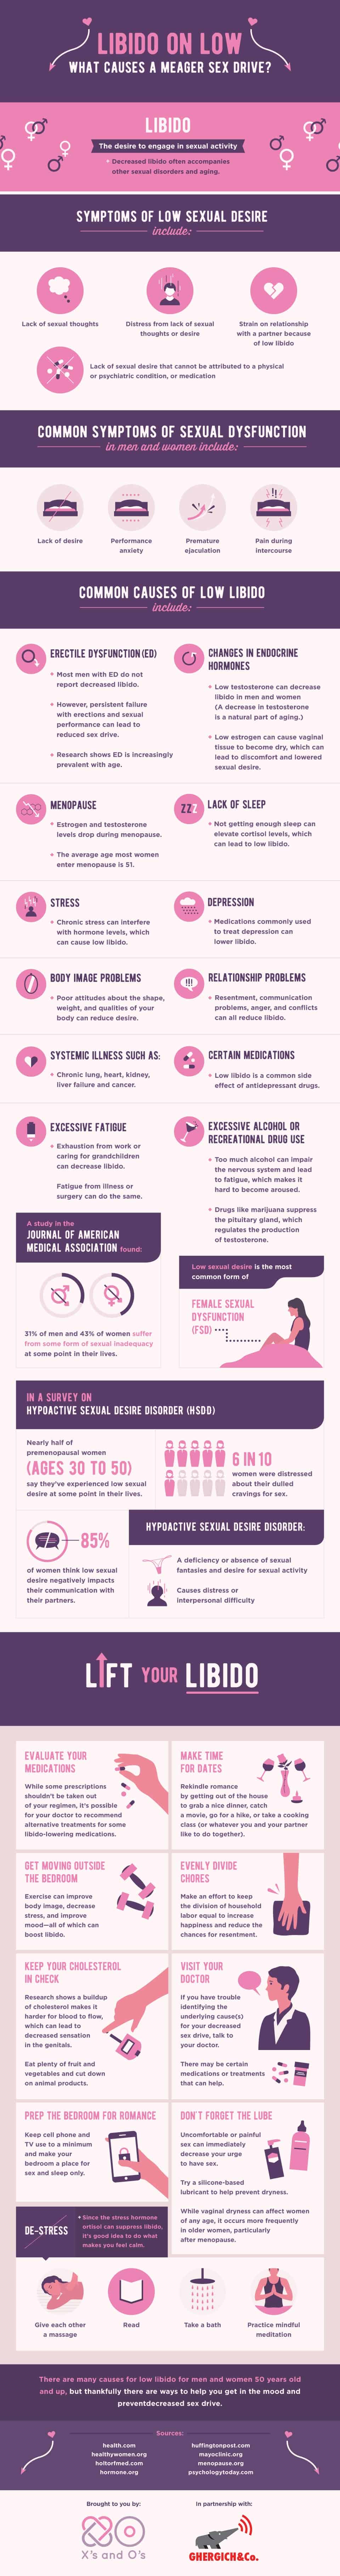 Low Libido Heres Why Your Sex Drive Isnt What It Used To Be Daily Infographic